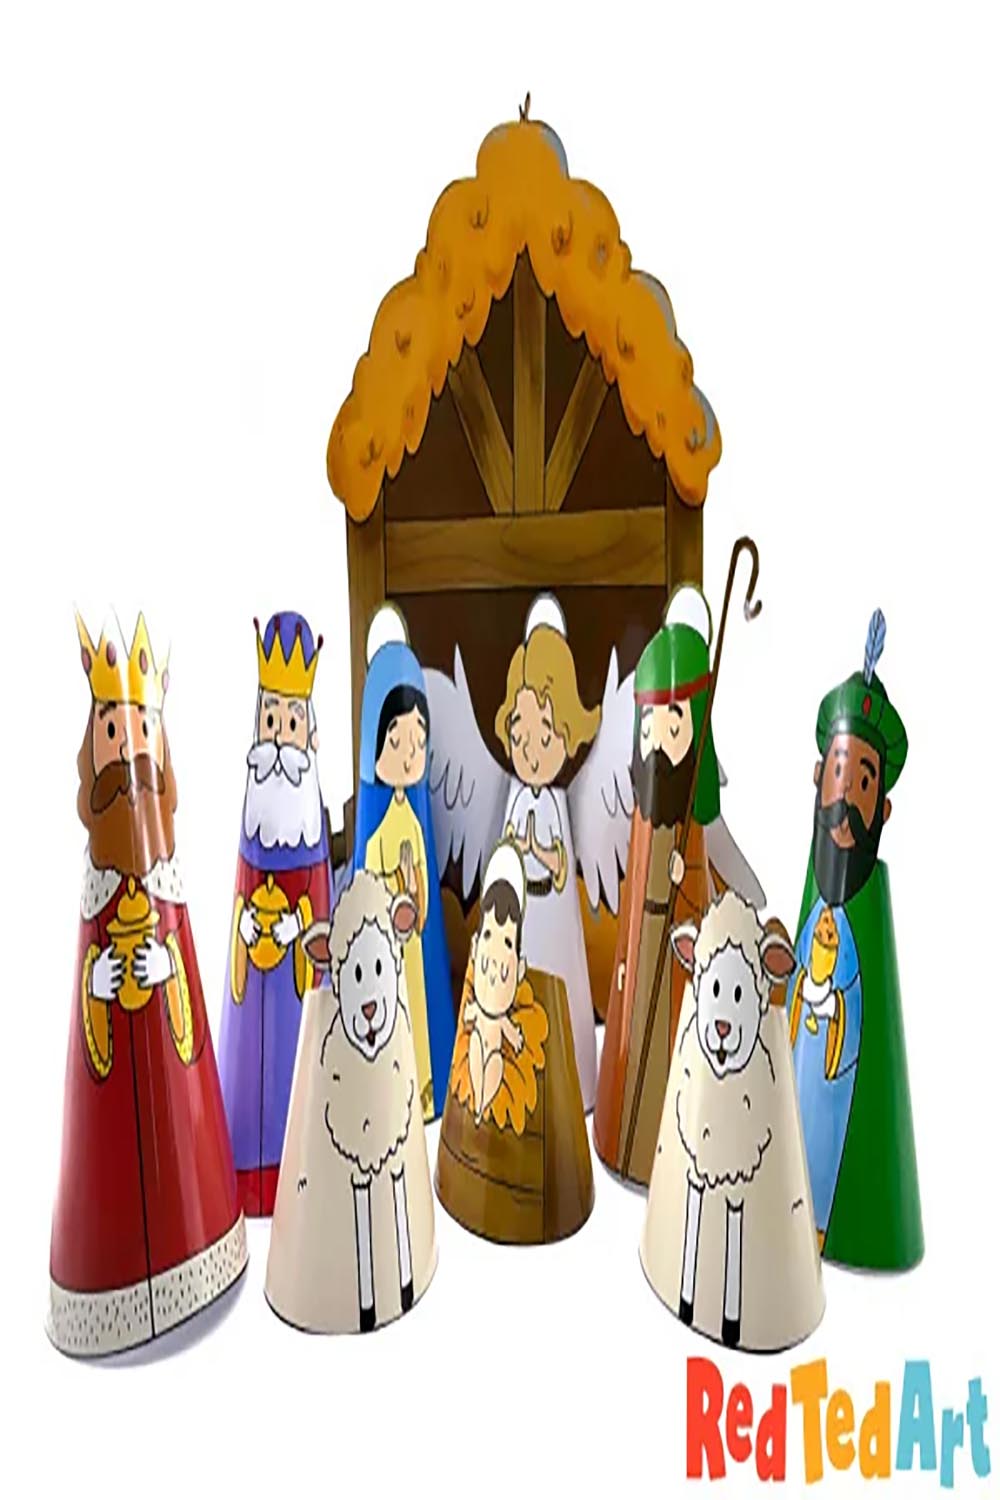 Full Nativity Scene Coloring Page pinterest preview image.